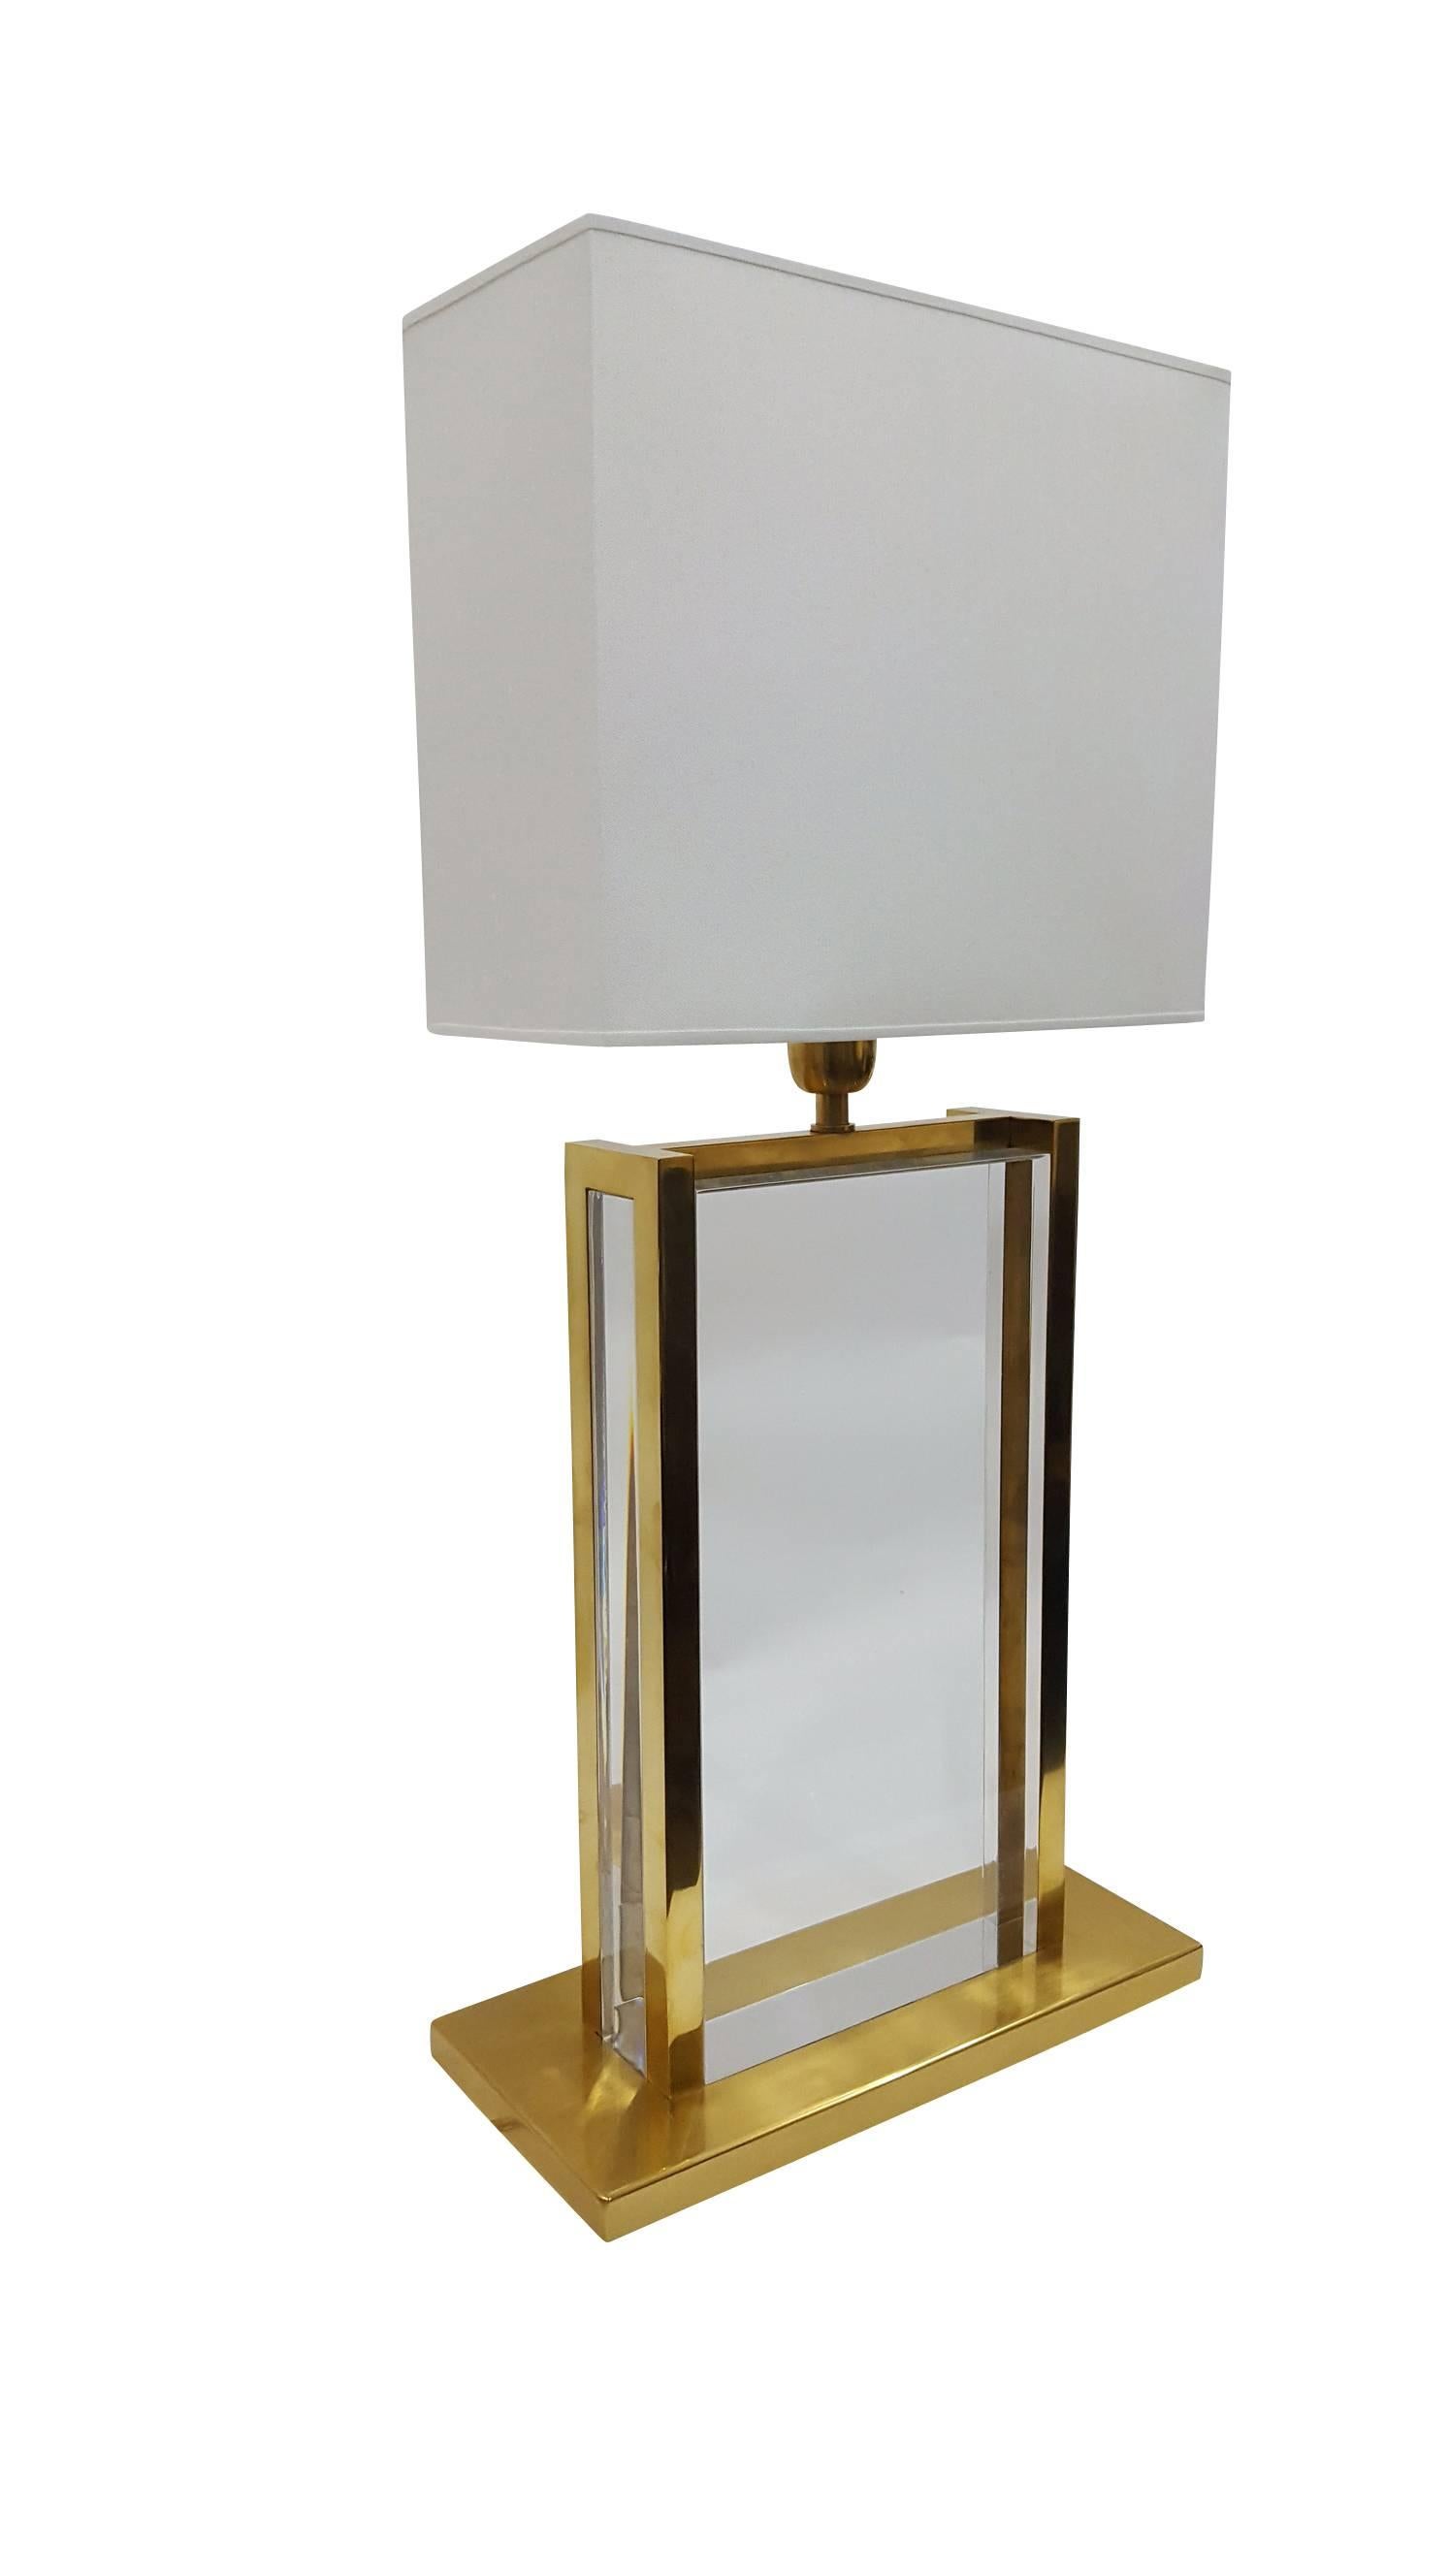 Stunning Mies corners table lamp in brass and acrylic by Michael Dawkins.